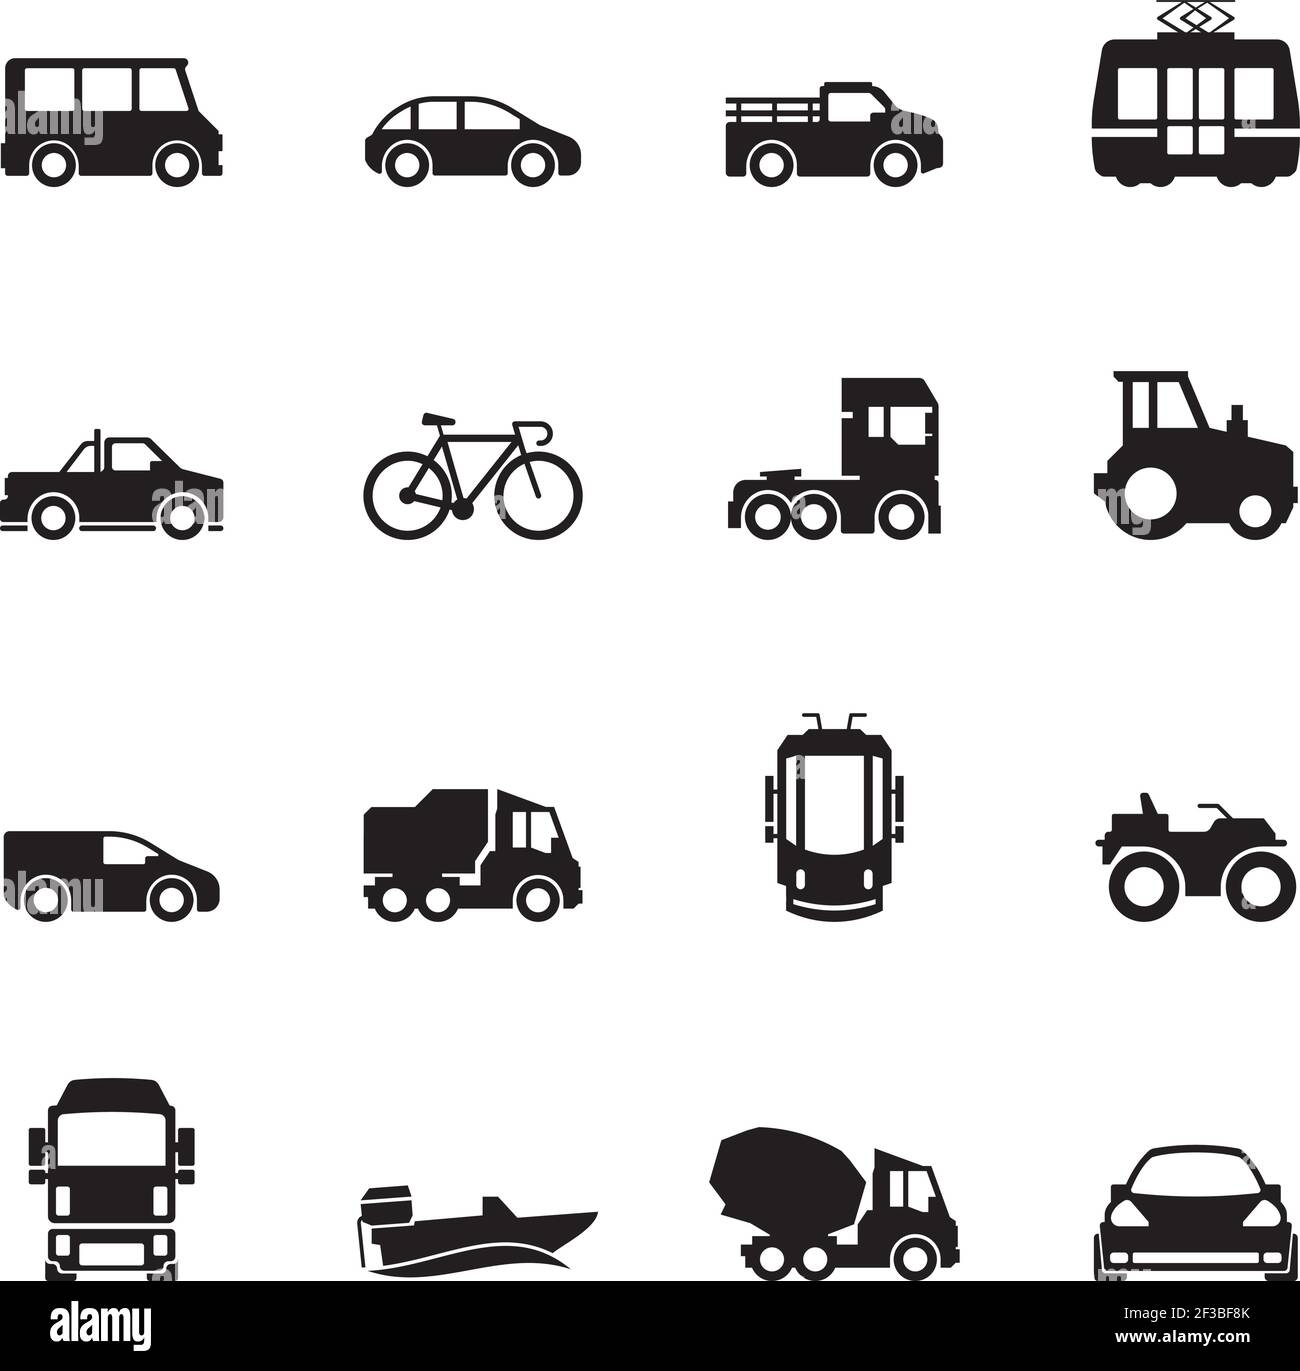 Transport pictogram. Car ship subway train yacht road symbols truck side view transport silhouette icon collection Stock Vector